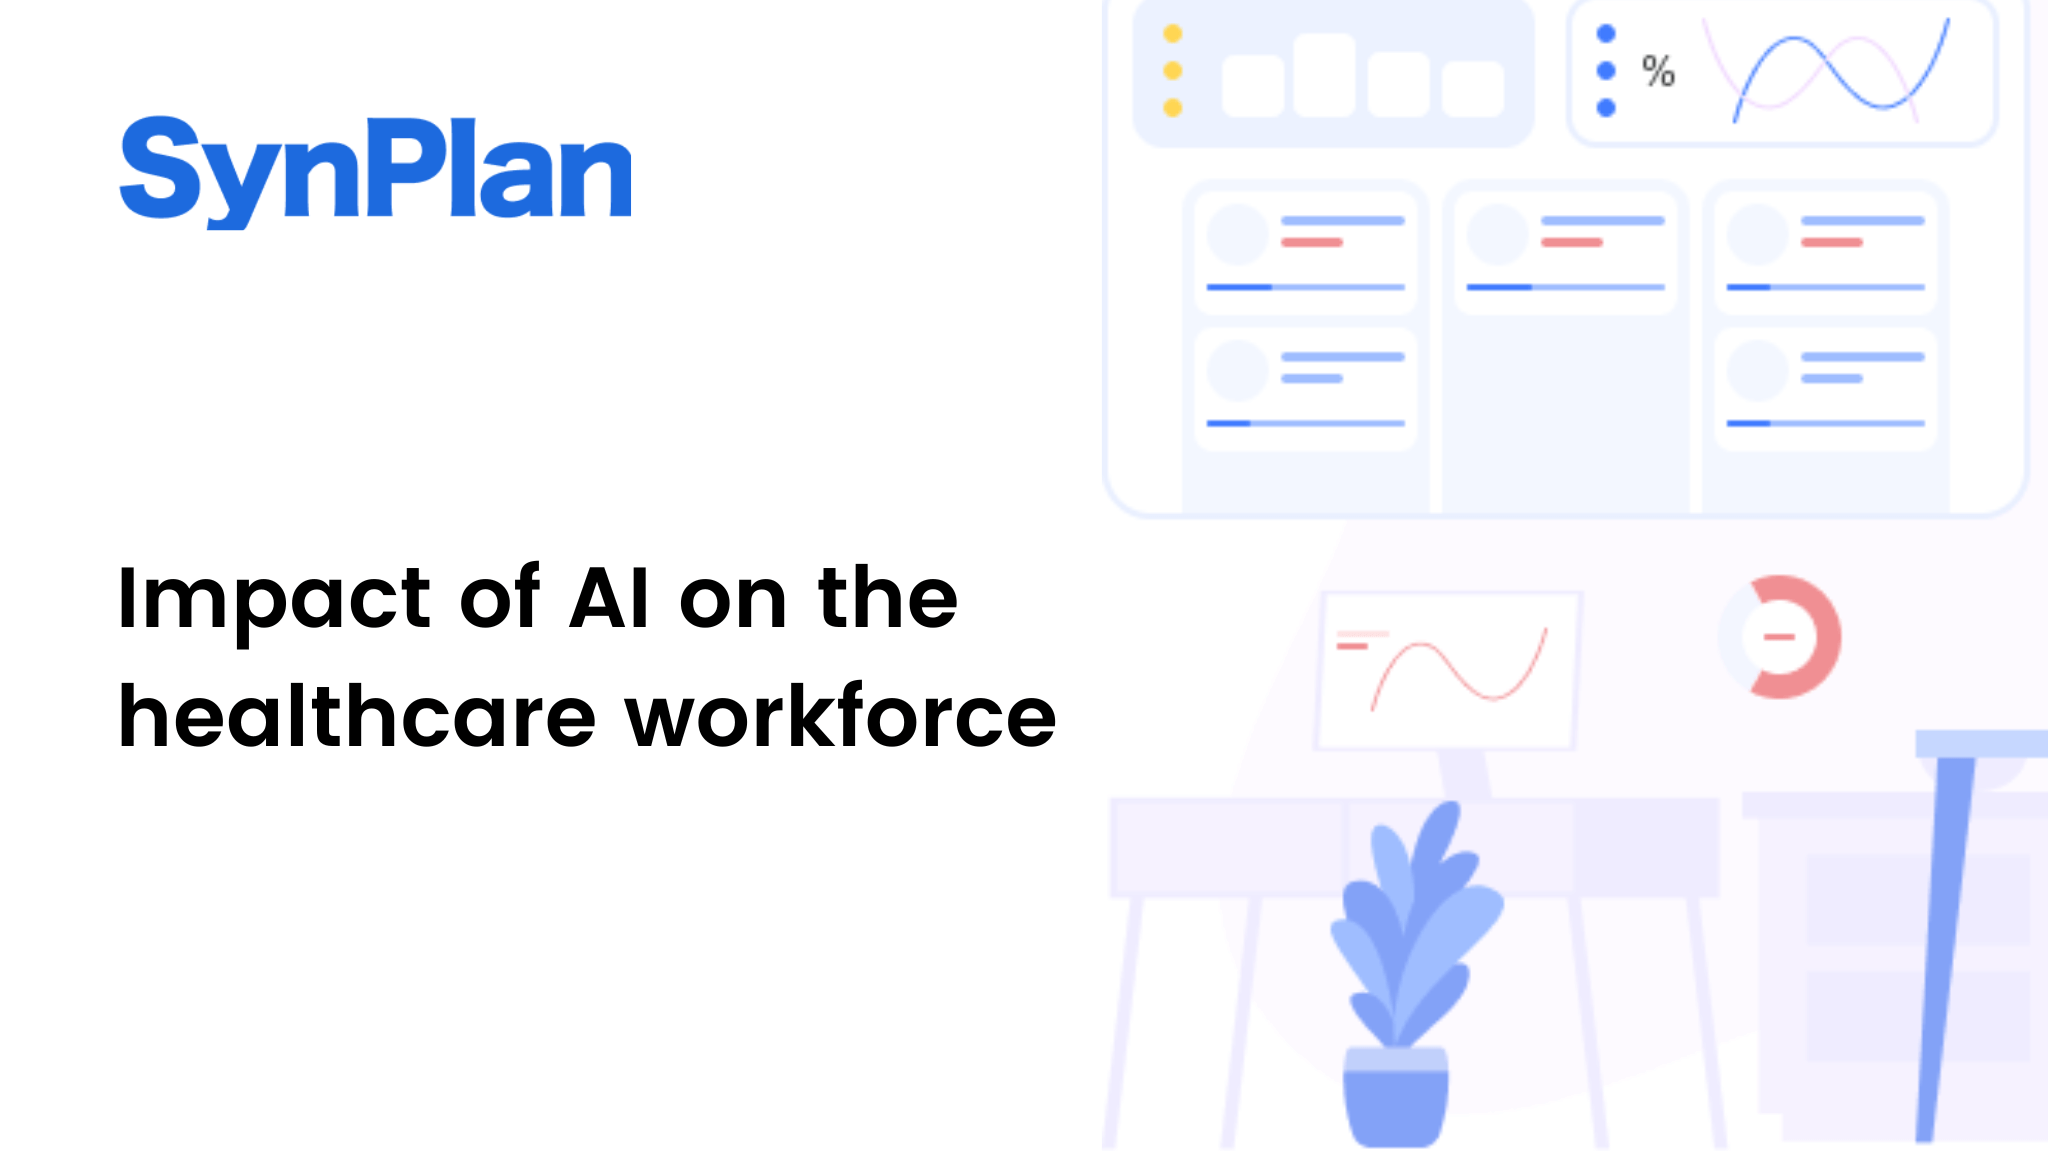 Impact of AI on the healthcare workforce